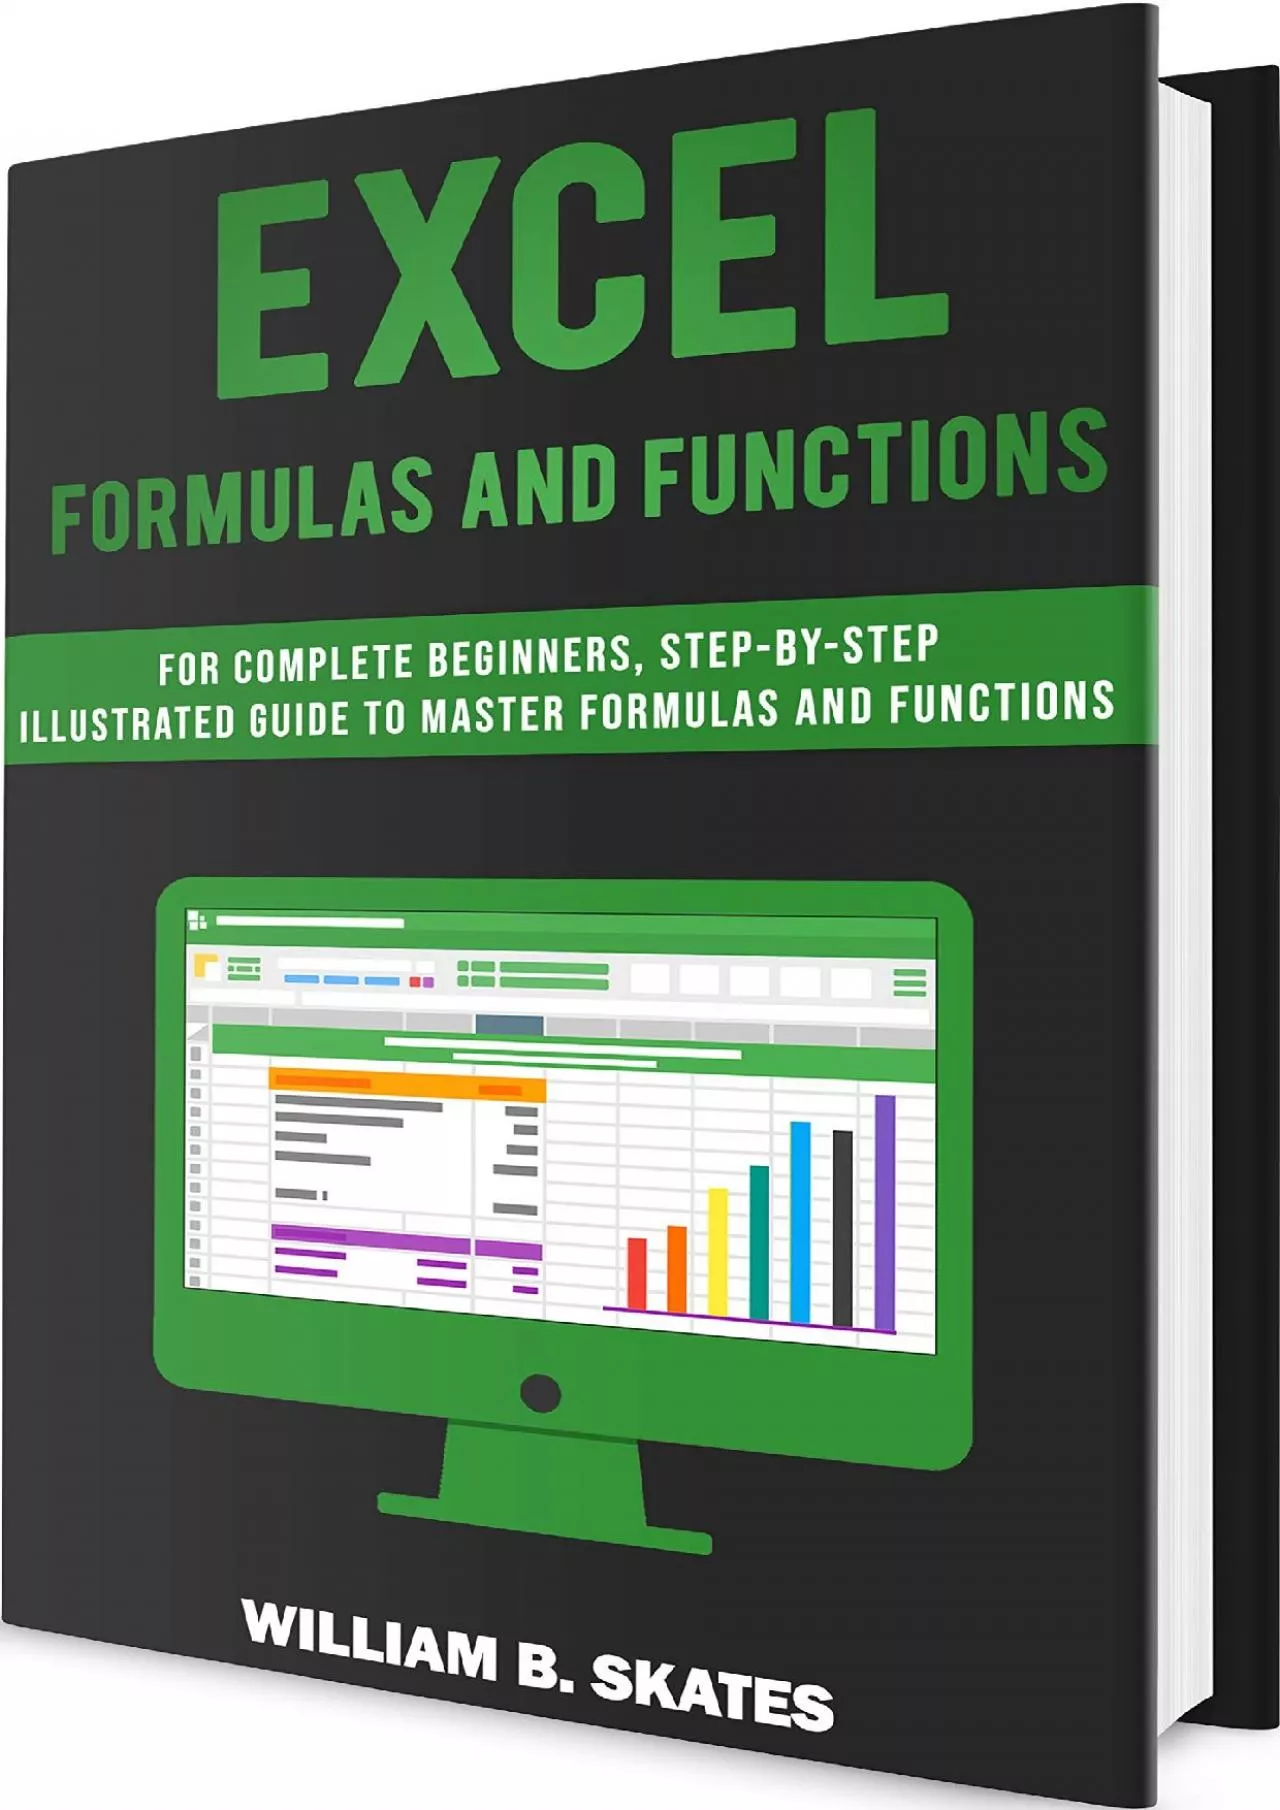 (BOOK)-Excel Formulas and Functions: For Complete Beginners, Step-By-Step Illustrated